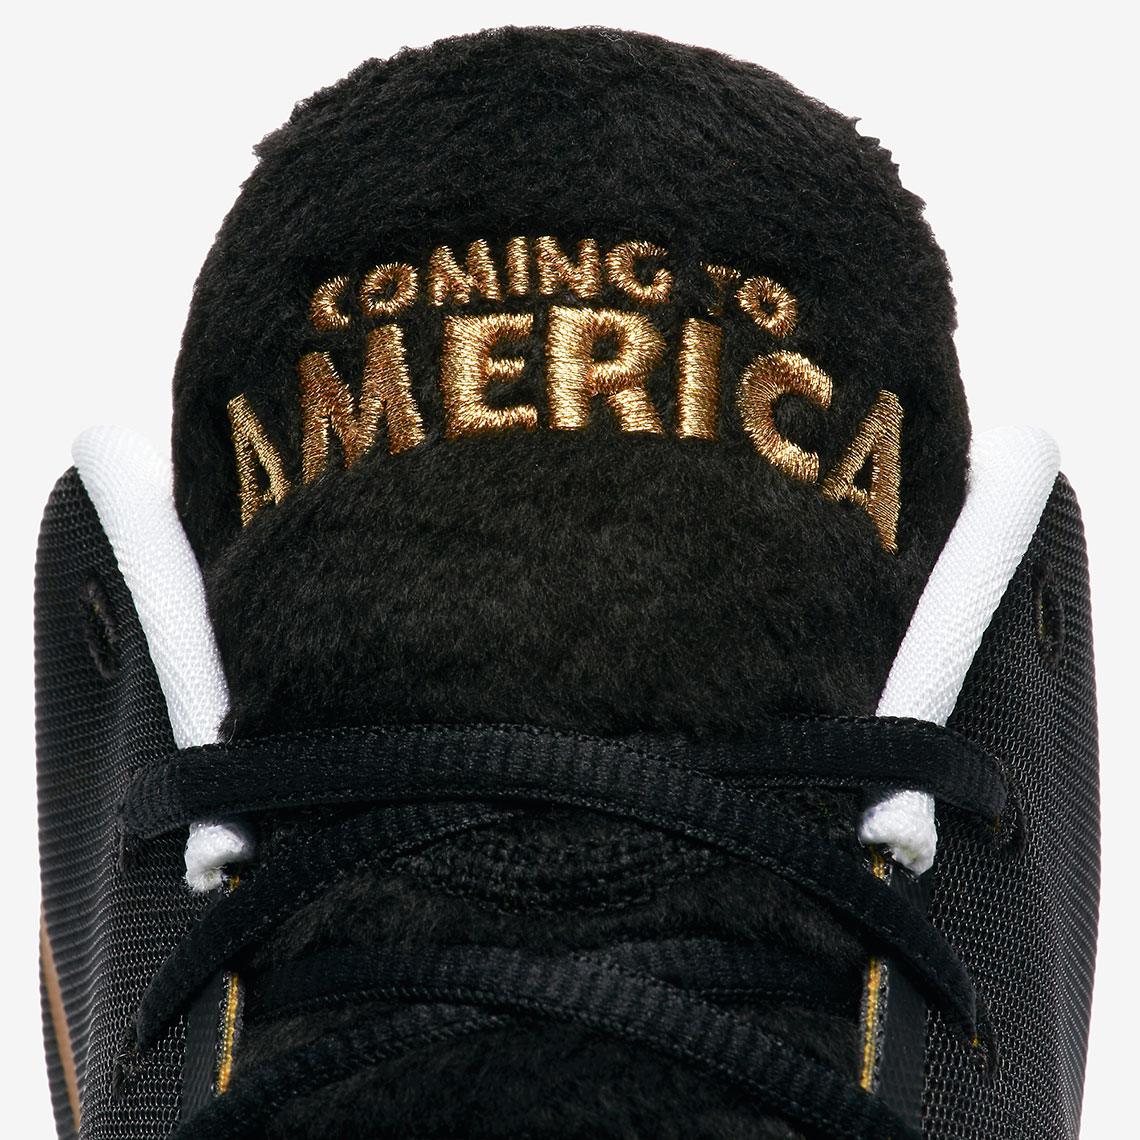 coming to america shoes